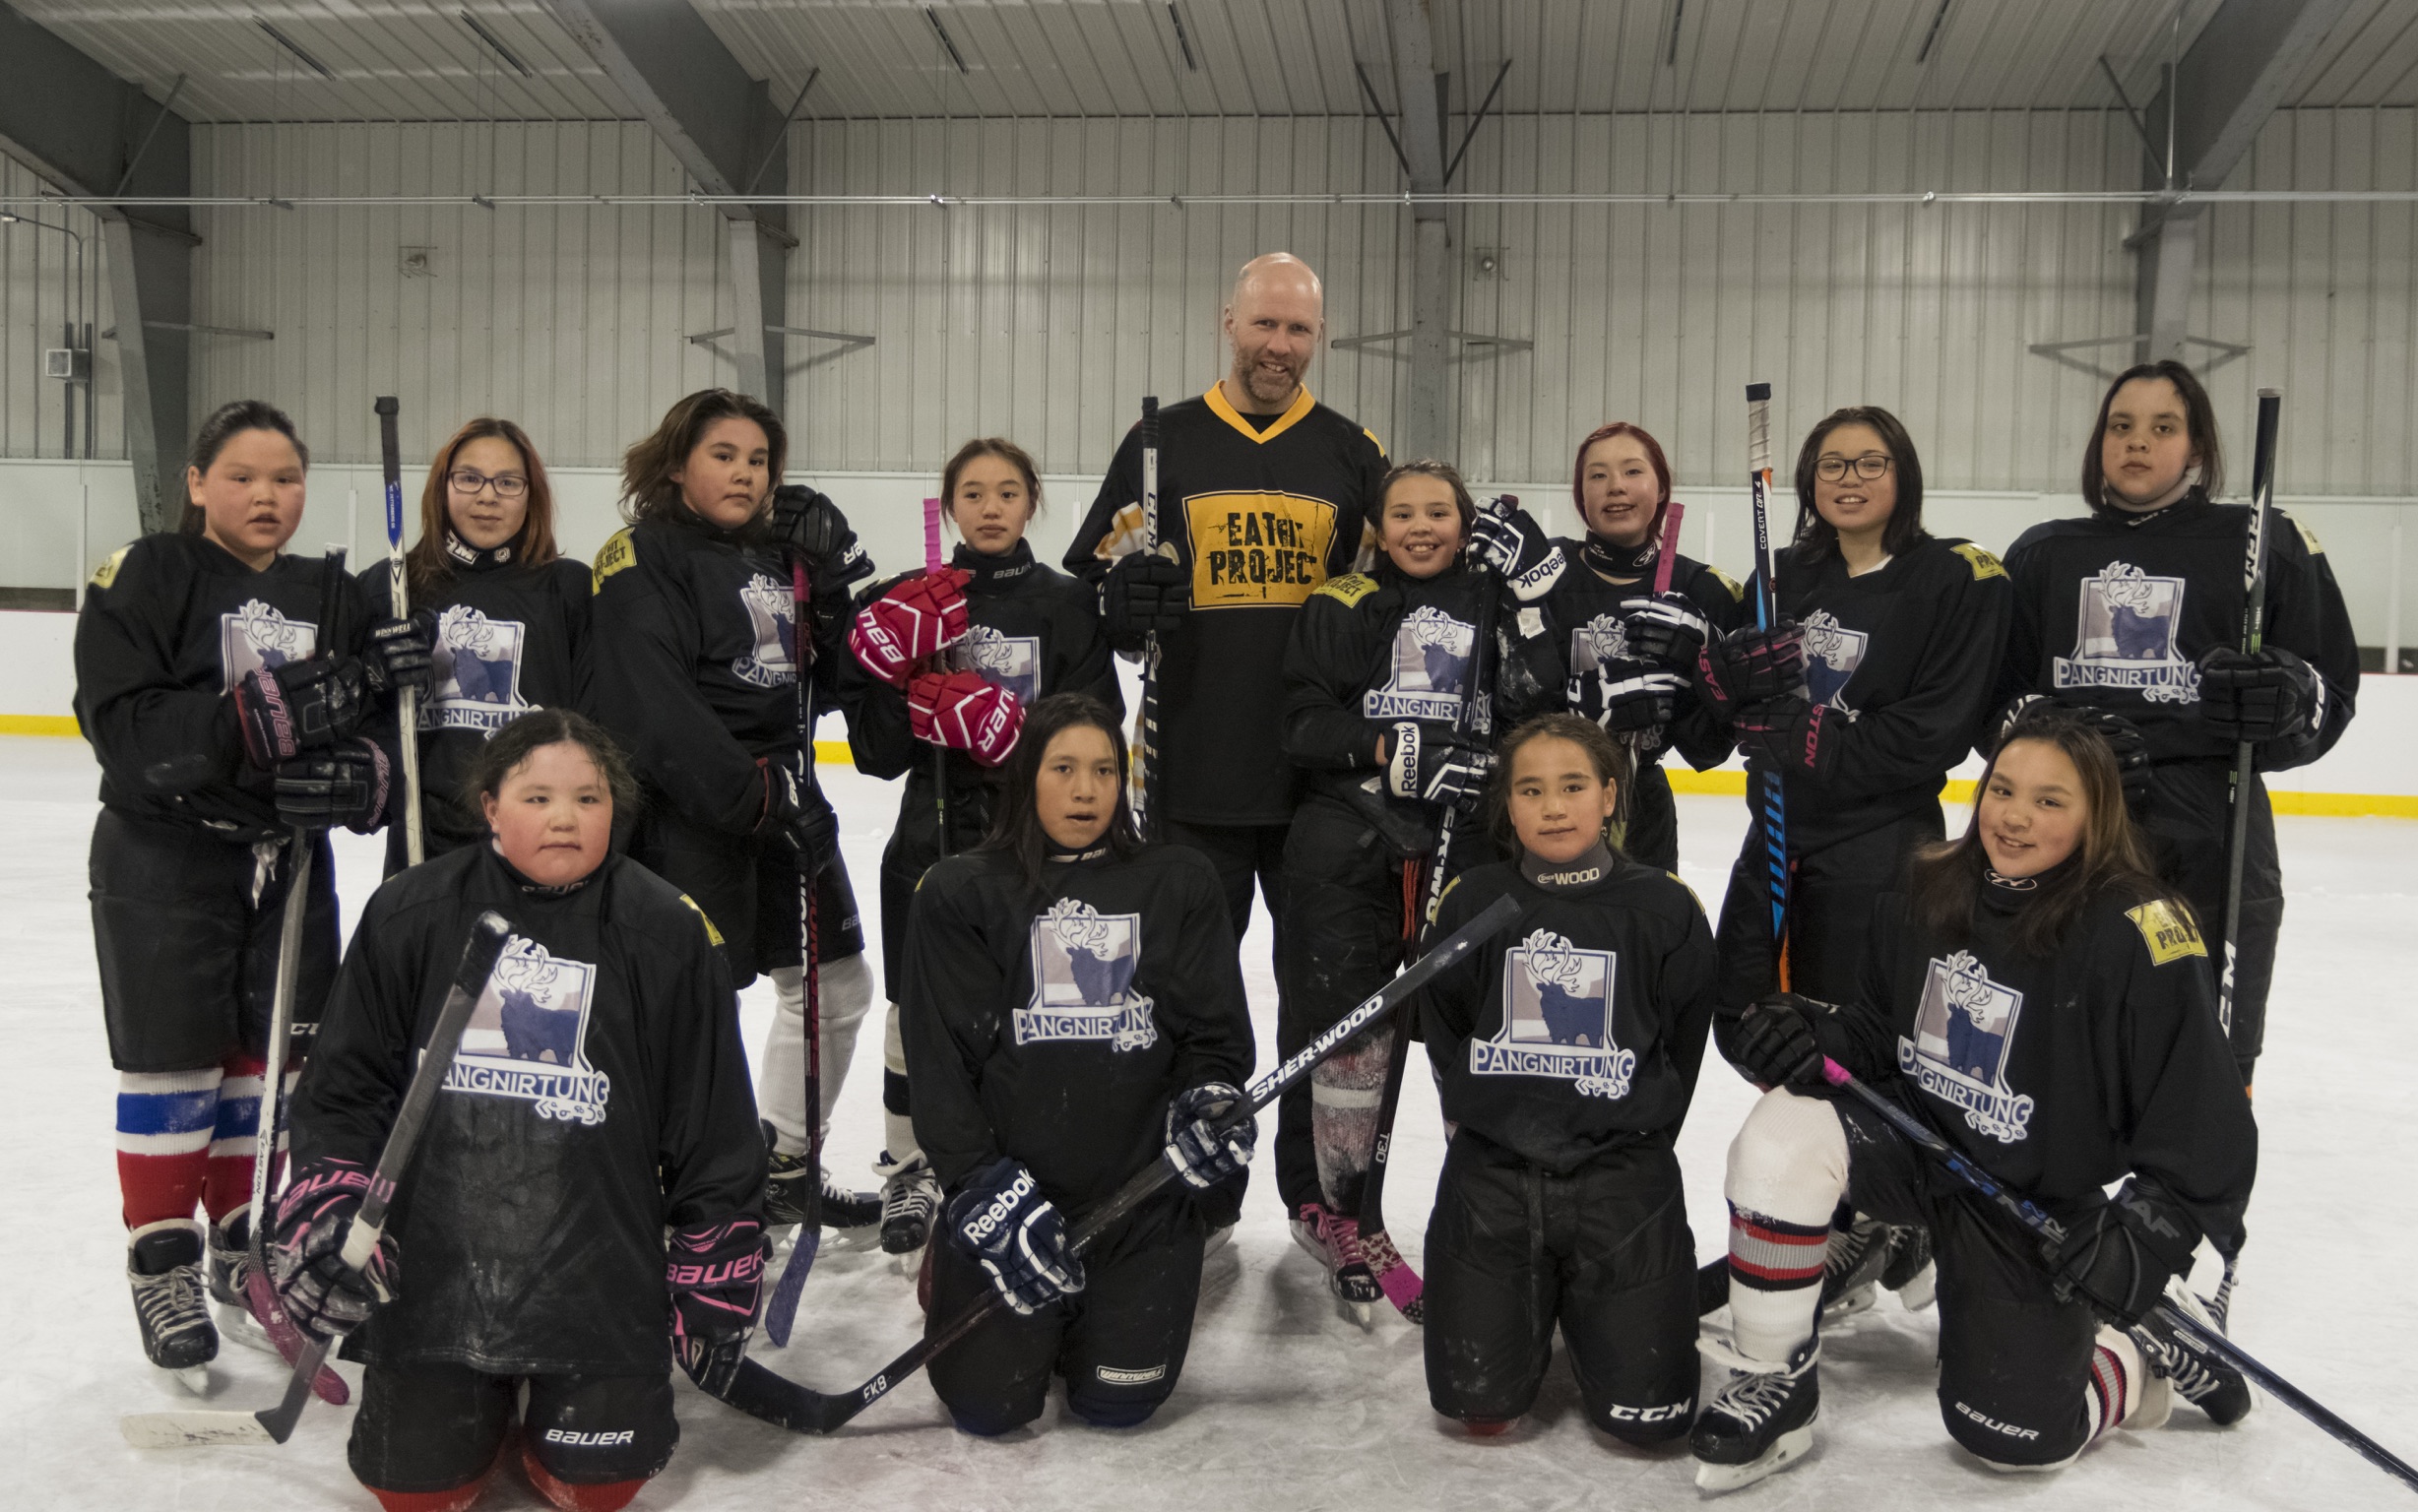 NHL Stanley Cup Champion Greg de Vries on the ice with Pangnirtung kids